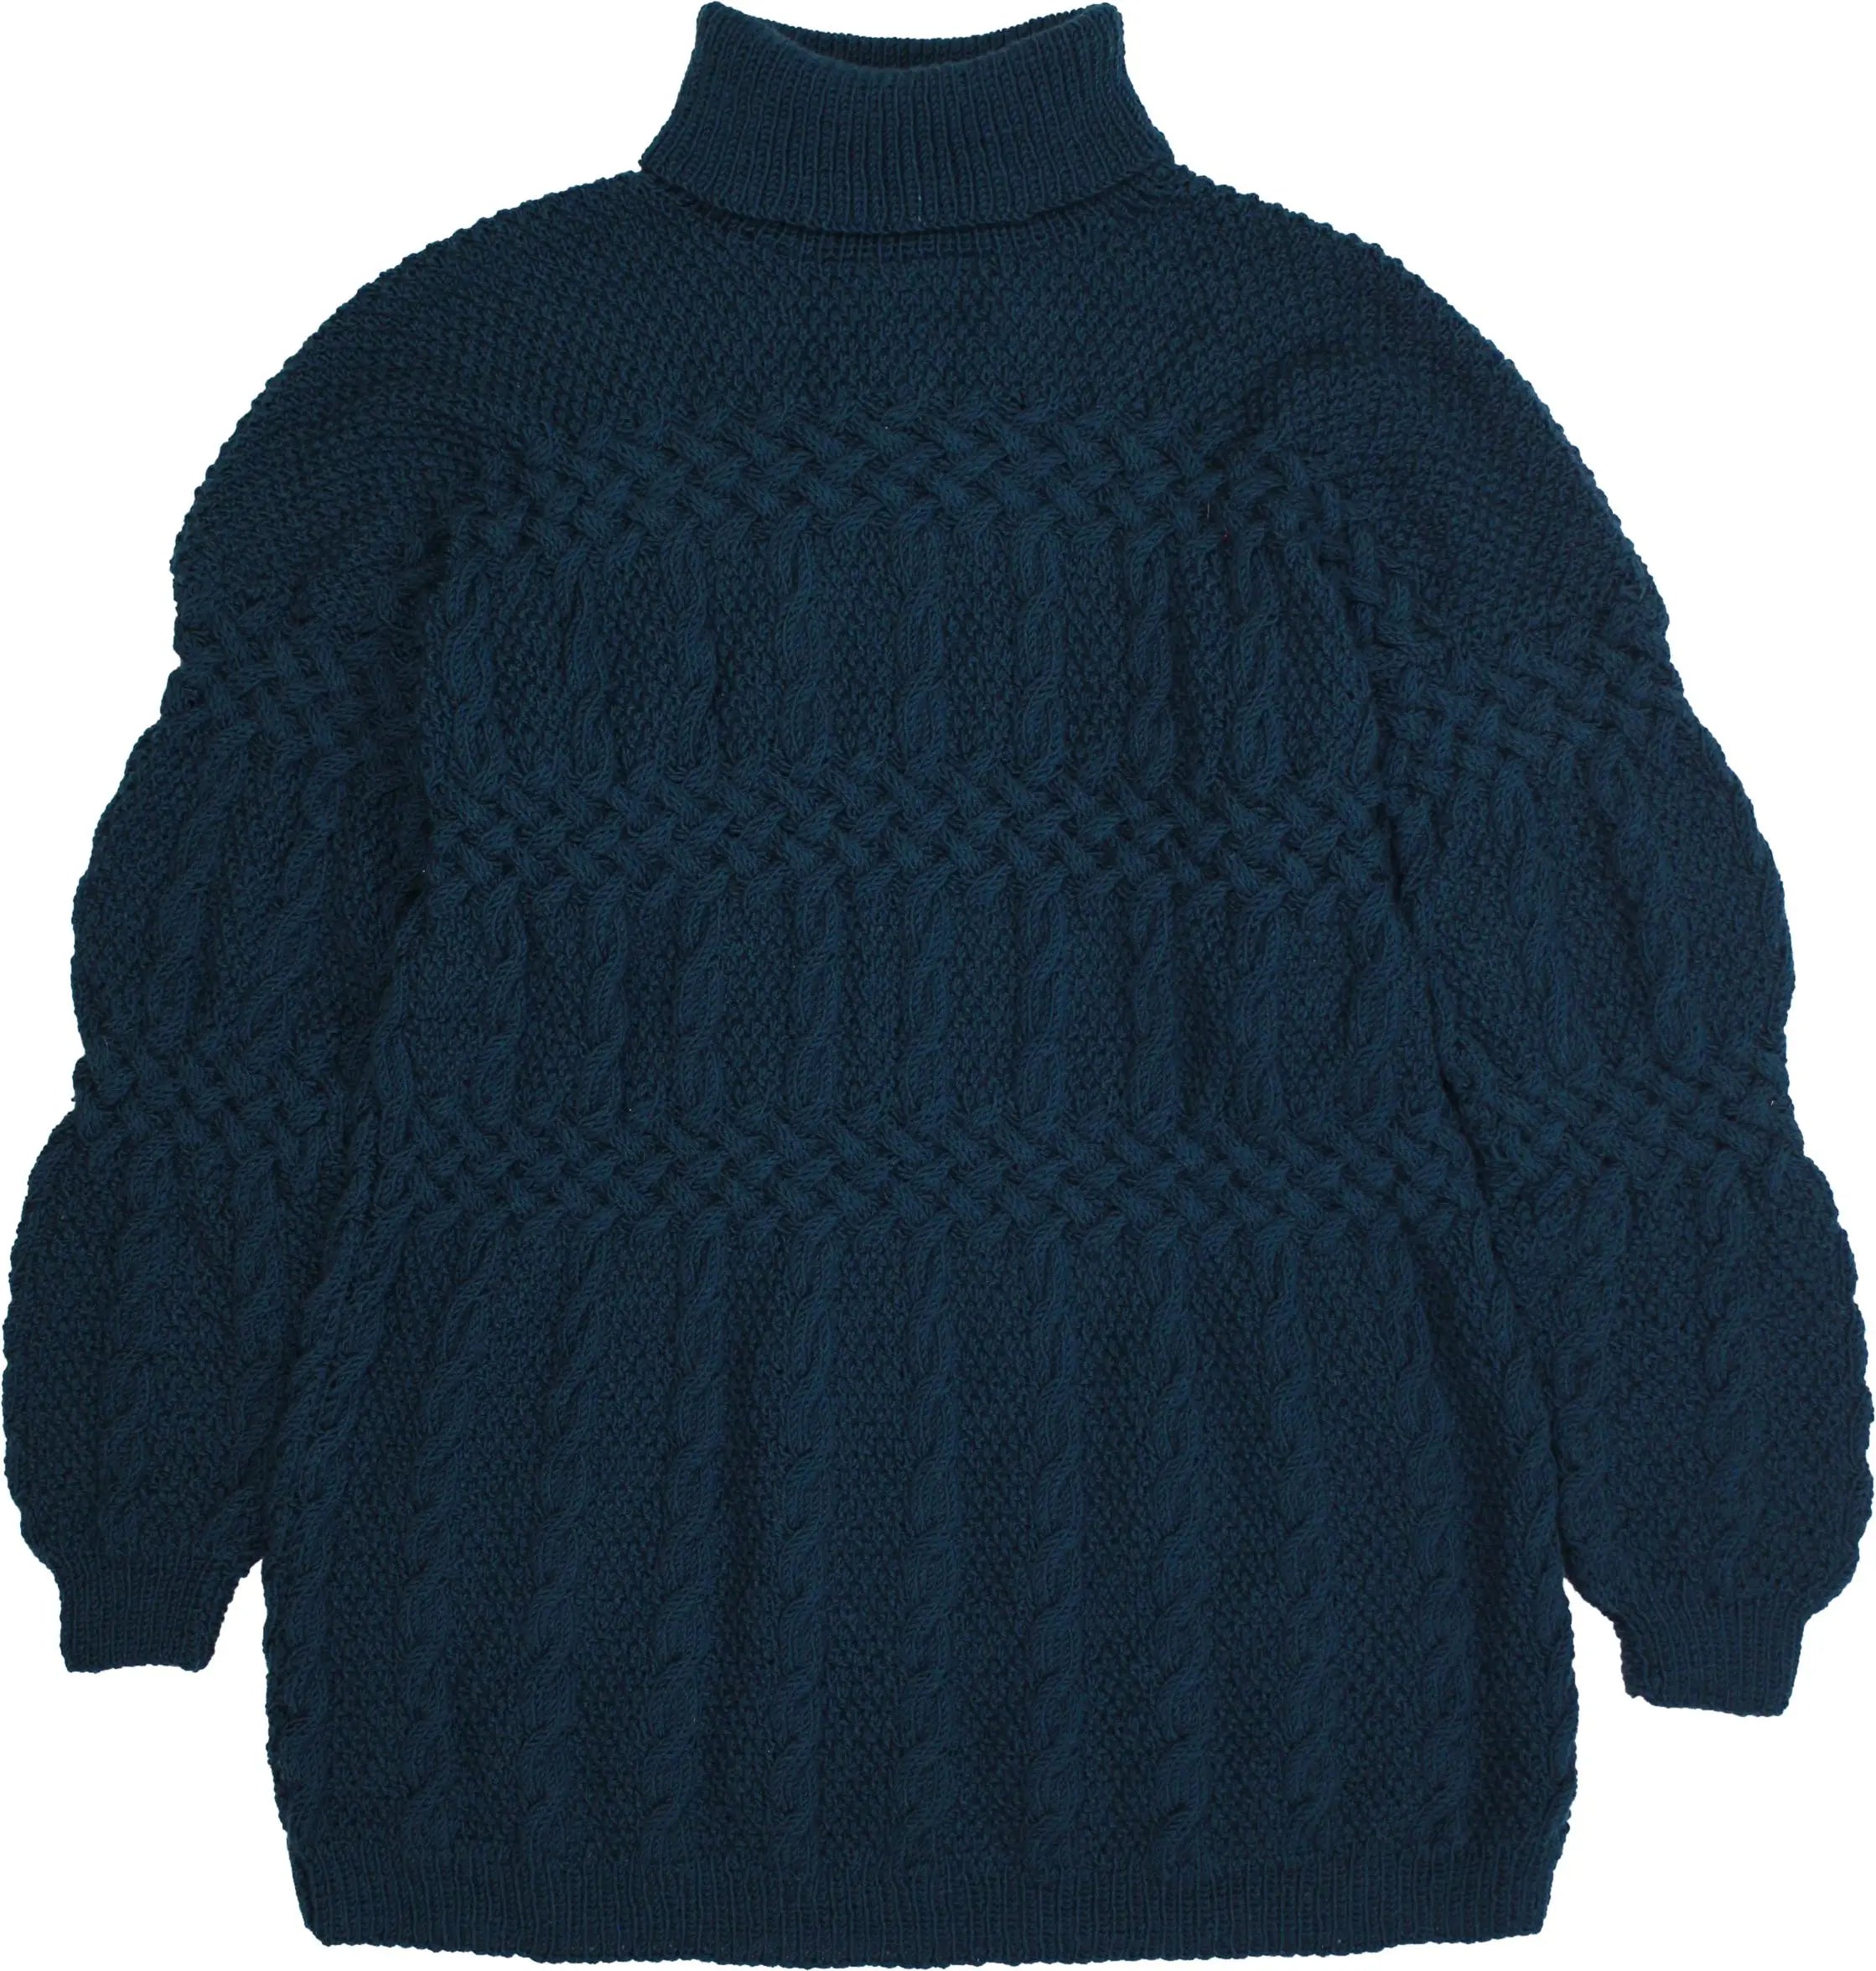 Unknown - Beautiful Knitted Turtleneck Jumper- ThriftTale.com - Vintage and second handclothing